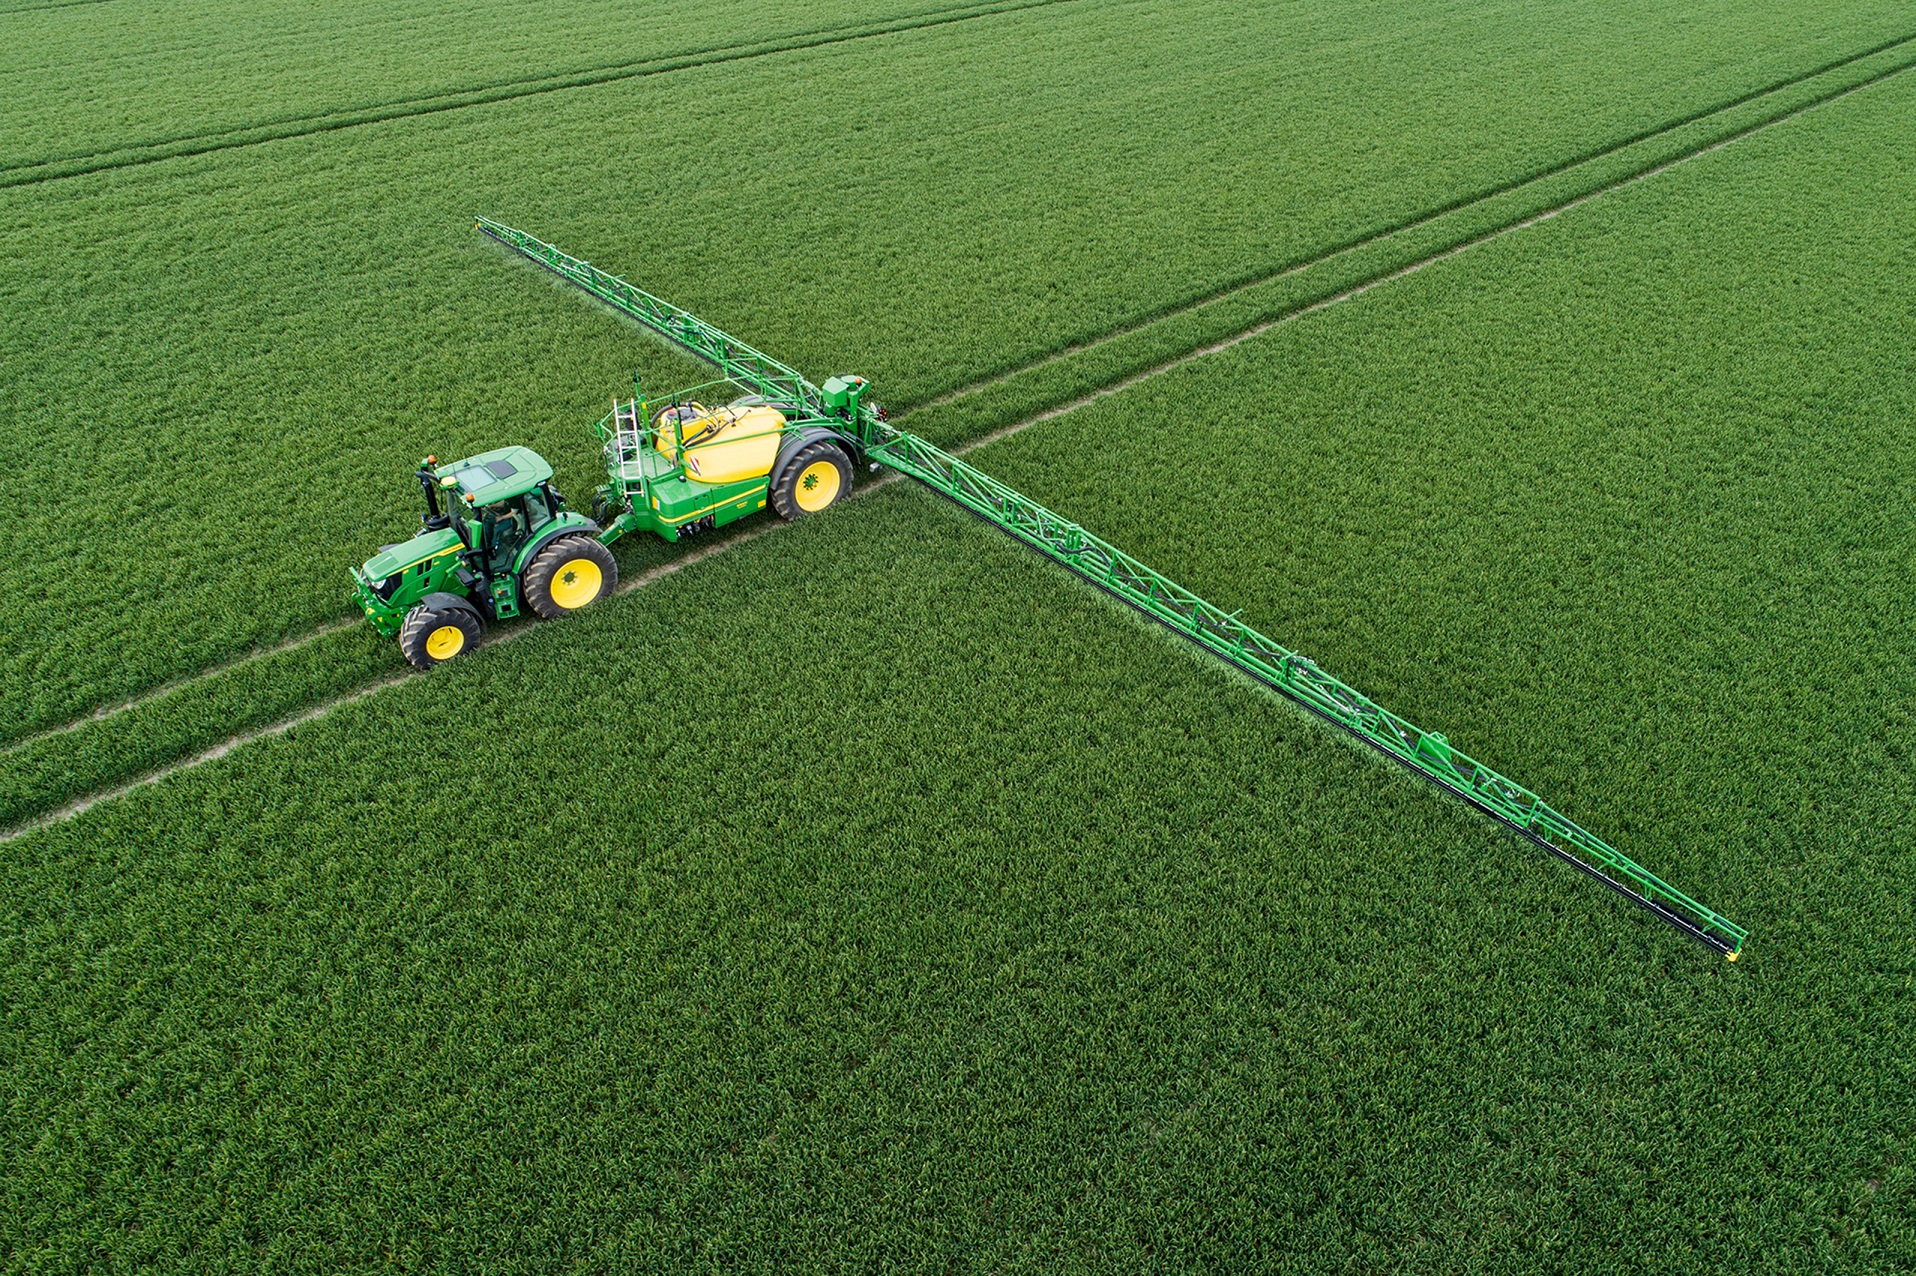 BASF and John Deere combine their advanced spraying technology and